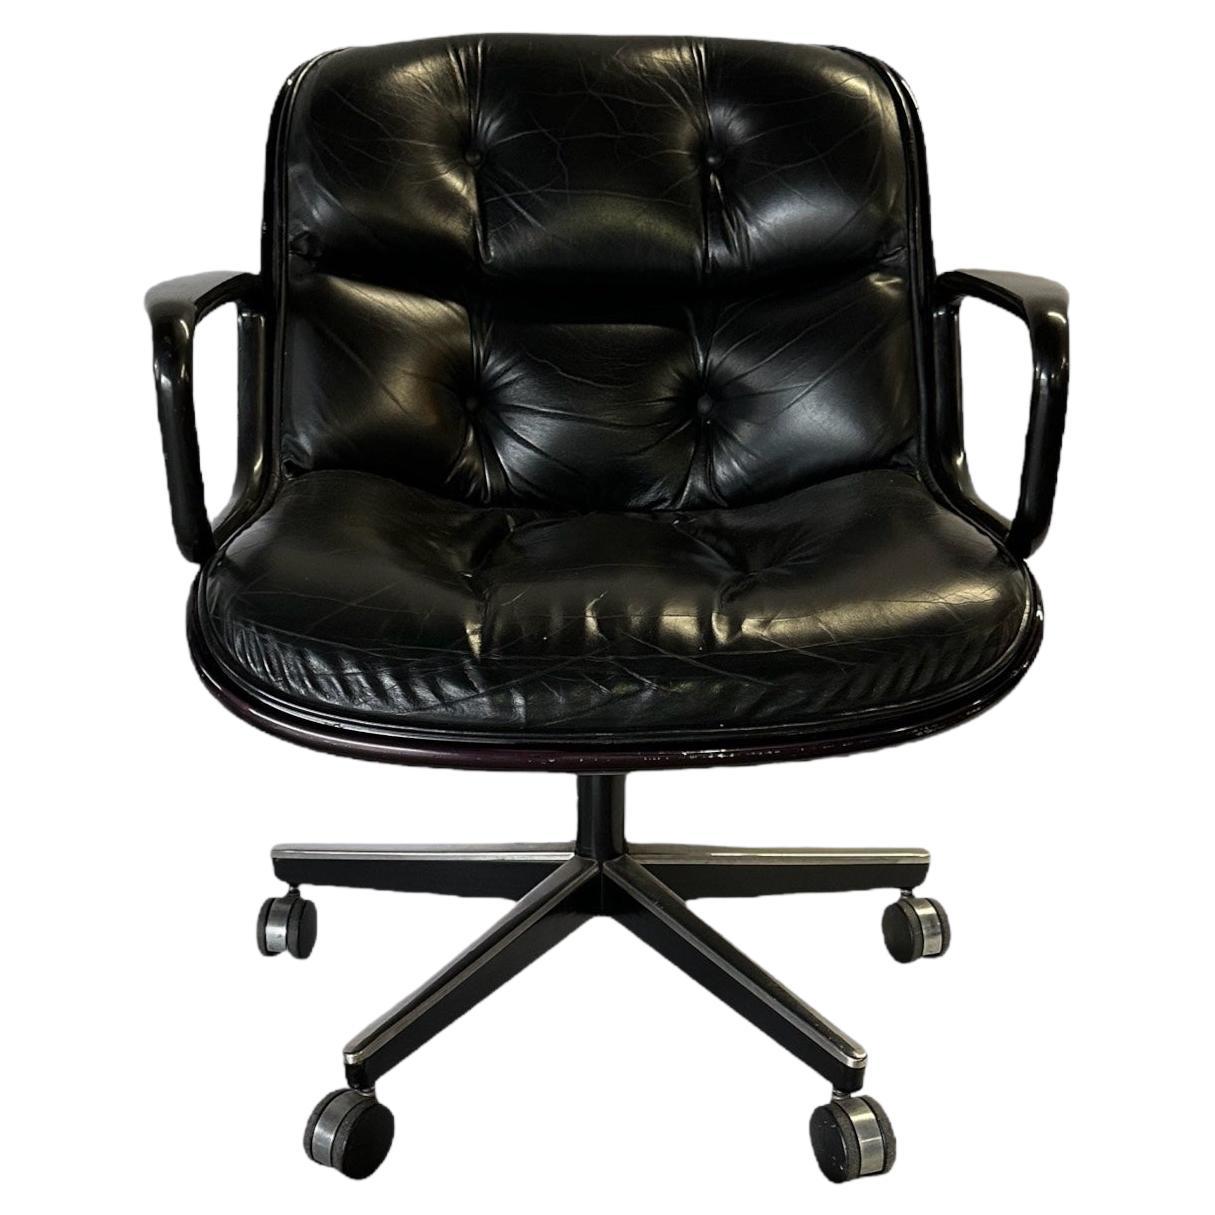 Charles Pollock Leather Desk Chair by Knoll